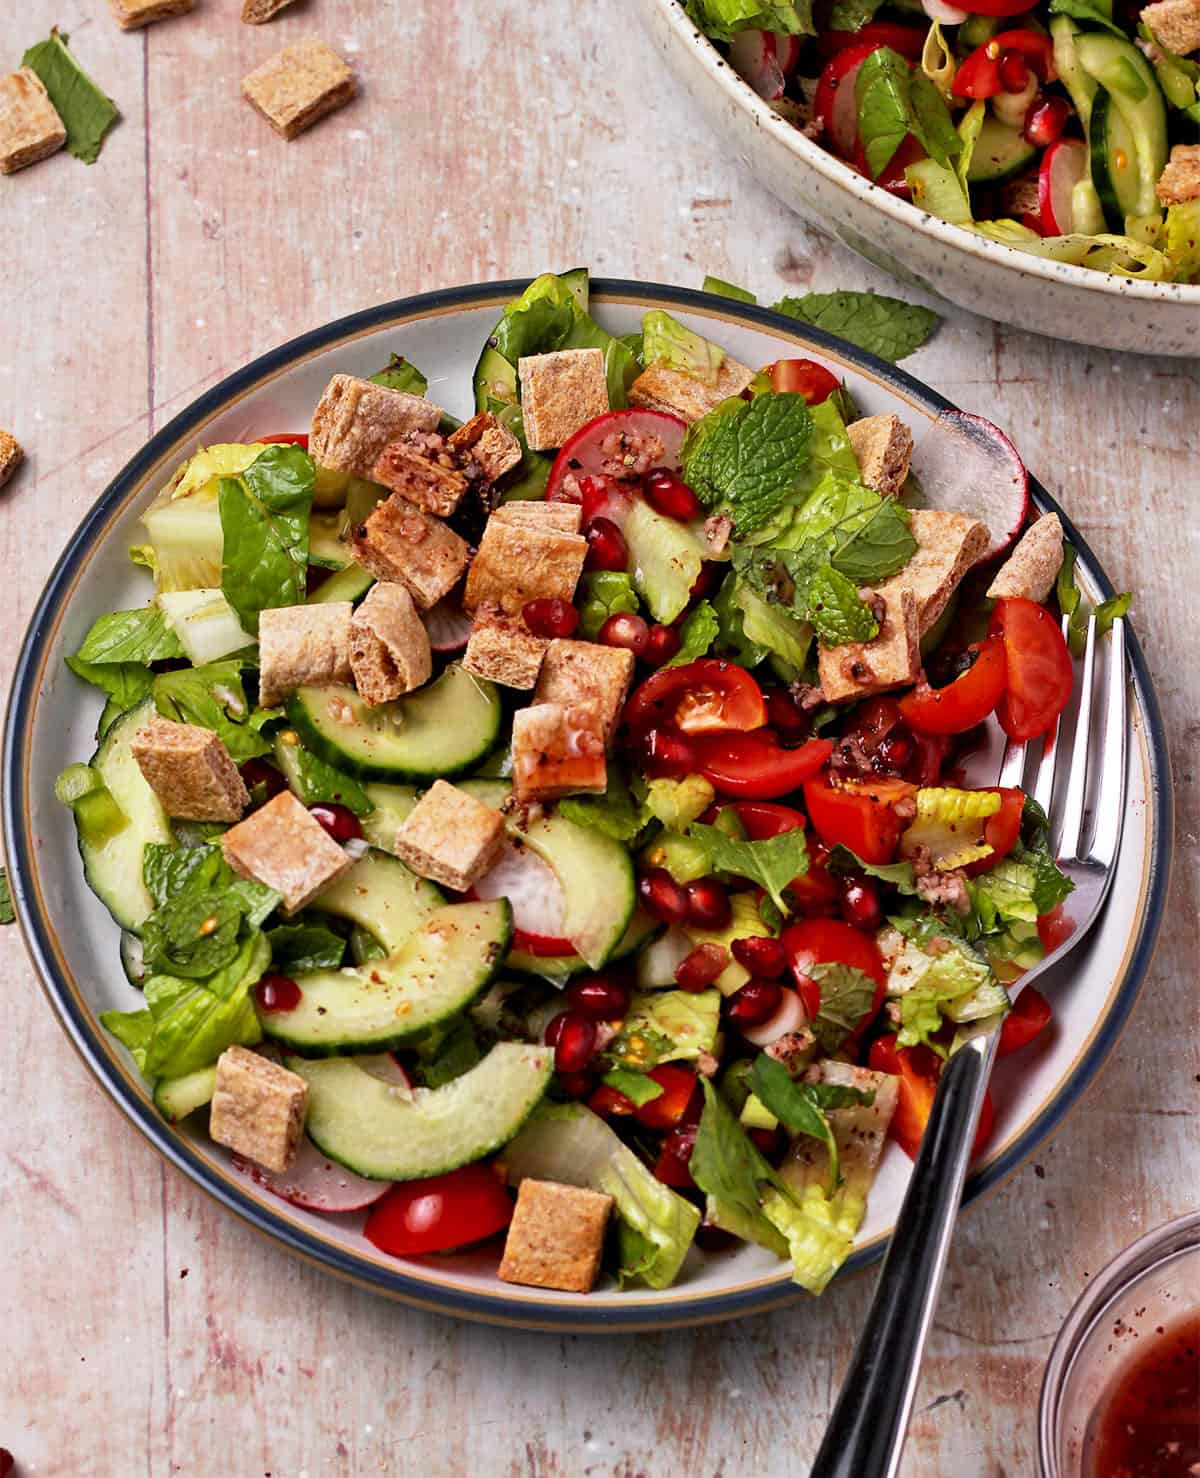 Fattoush salad on a plate with a fork.